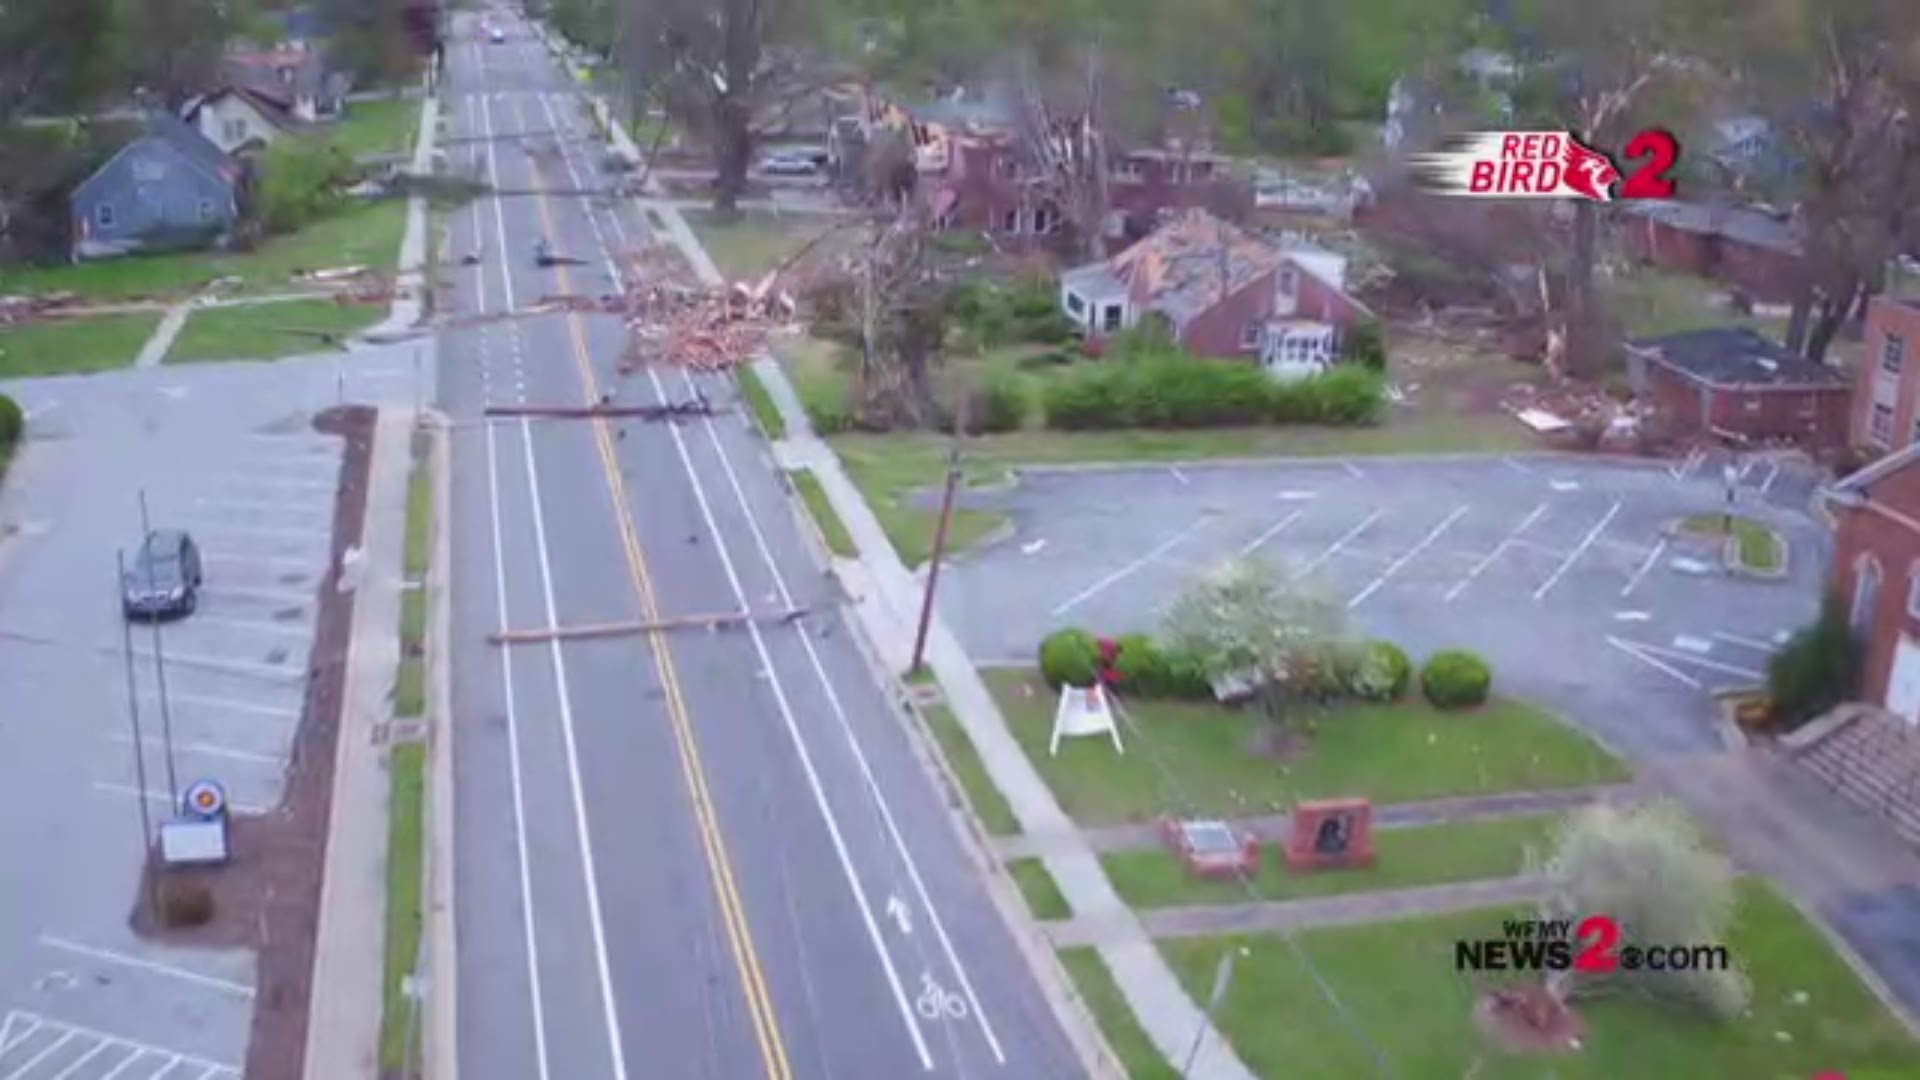 Red Bird 2 Video ' Damage at East Bessemer Ave. in Greensboro